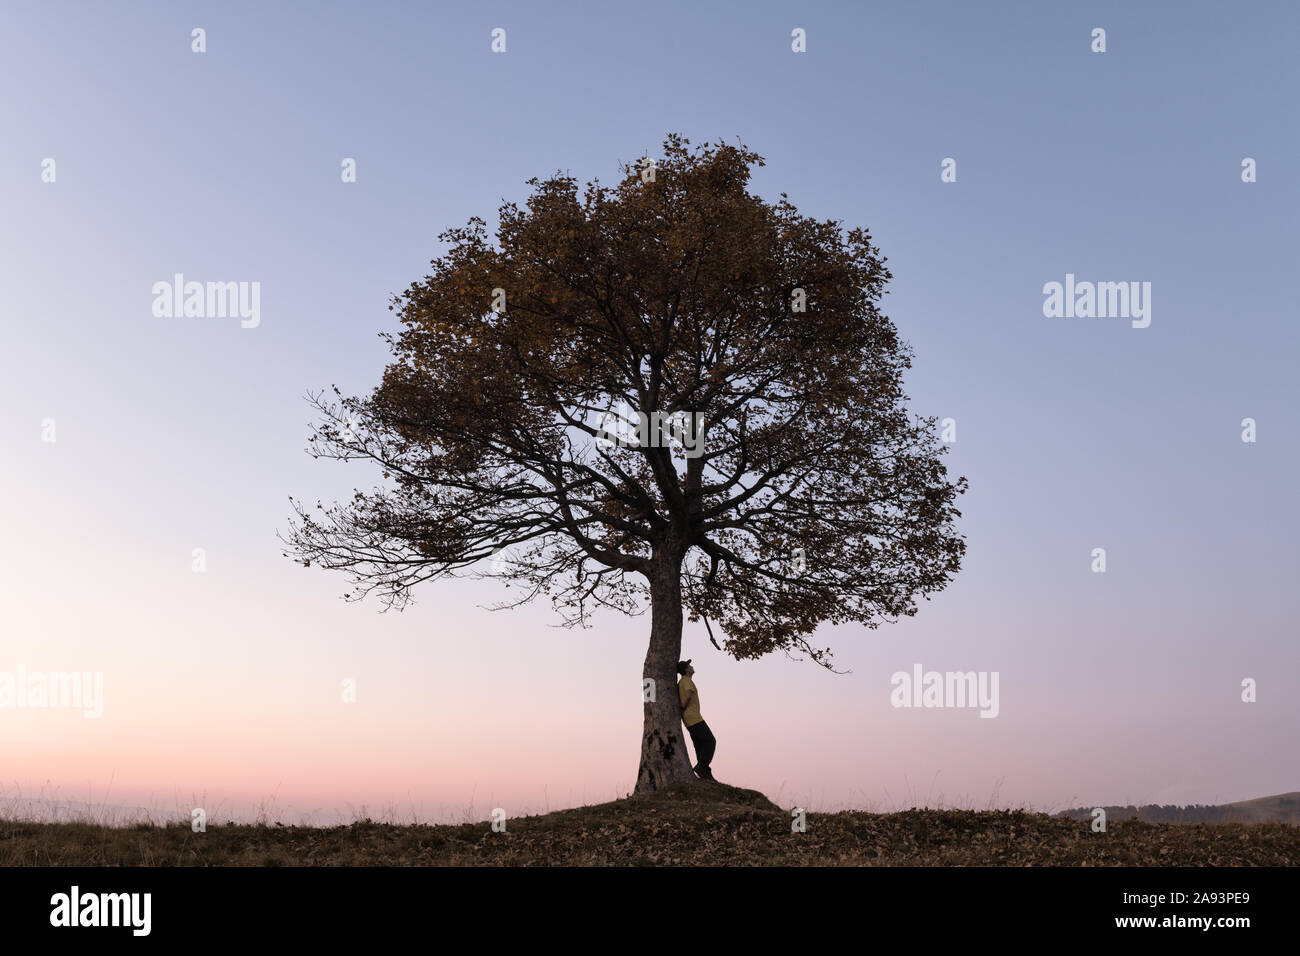 Silhouette of tourist under majestic tree at evening mountains meadow at sunset. Dramatic colorful scene with clear orange sky. Landscape photography Stock Photo